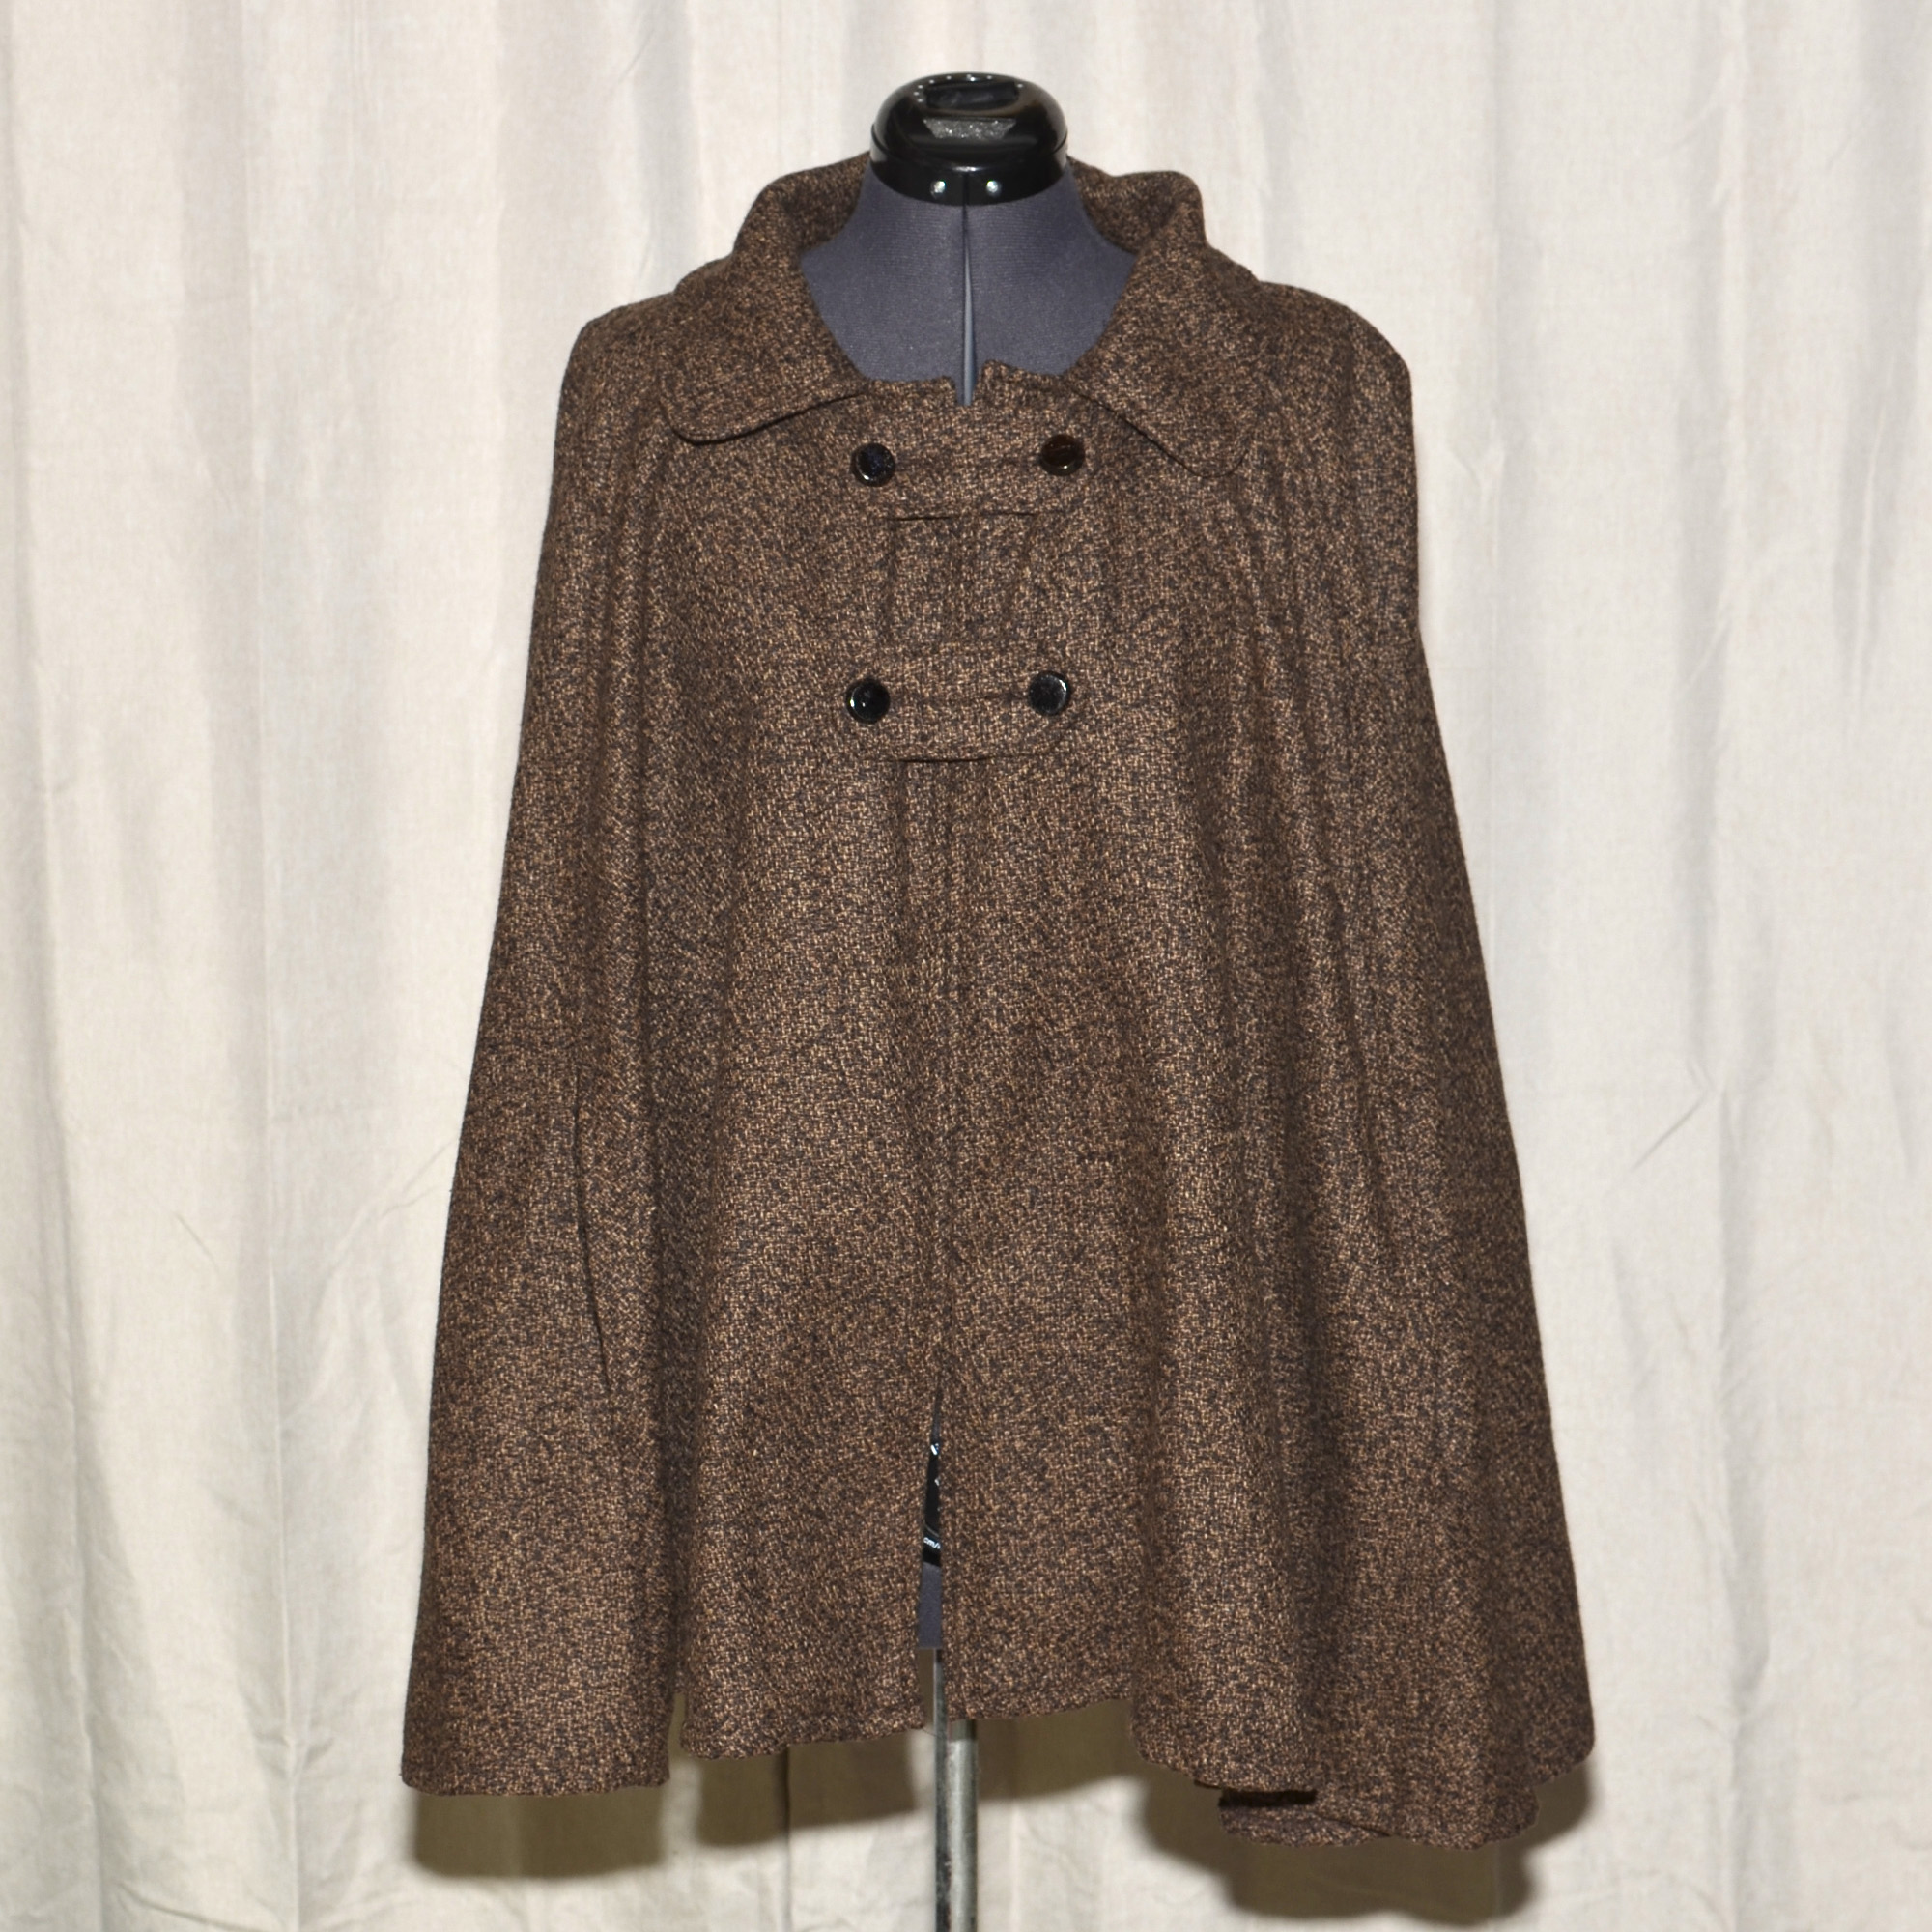 Mottled brown formal capelet jacket with open collar and button closure front, plus size, from Eshakti.